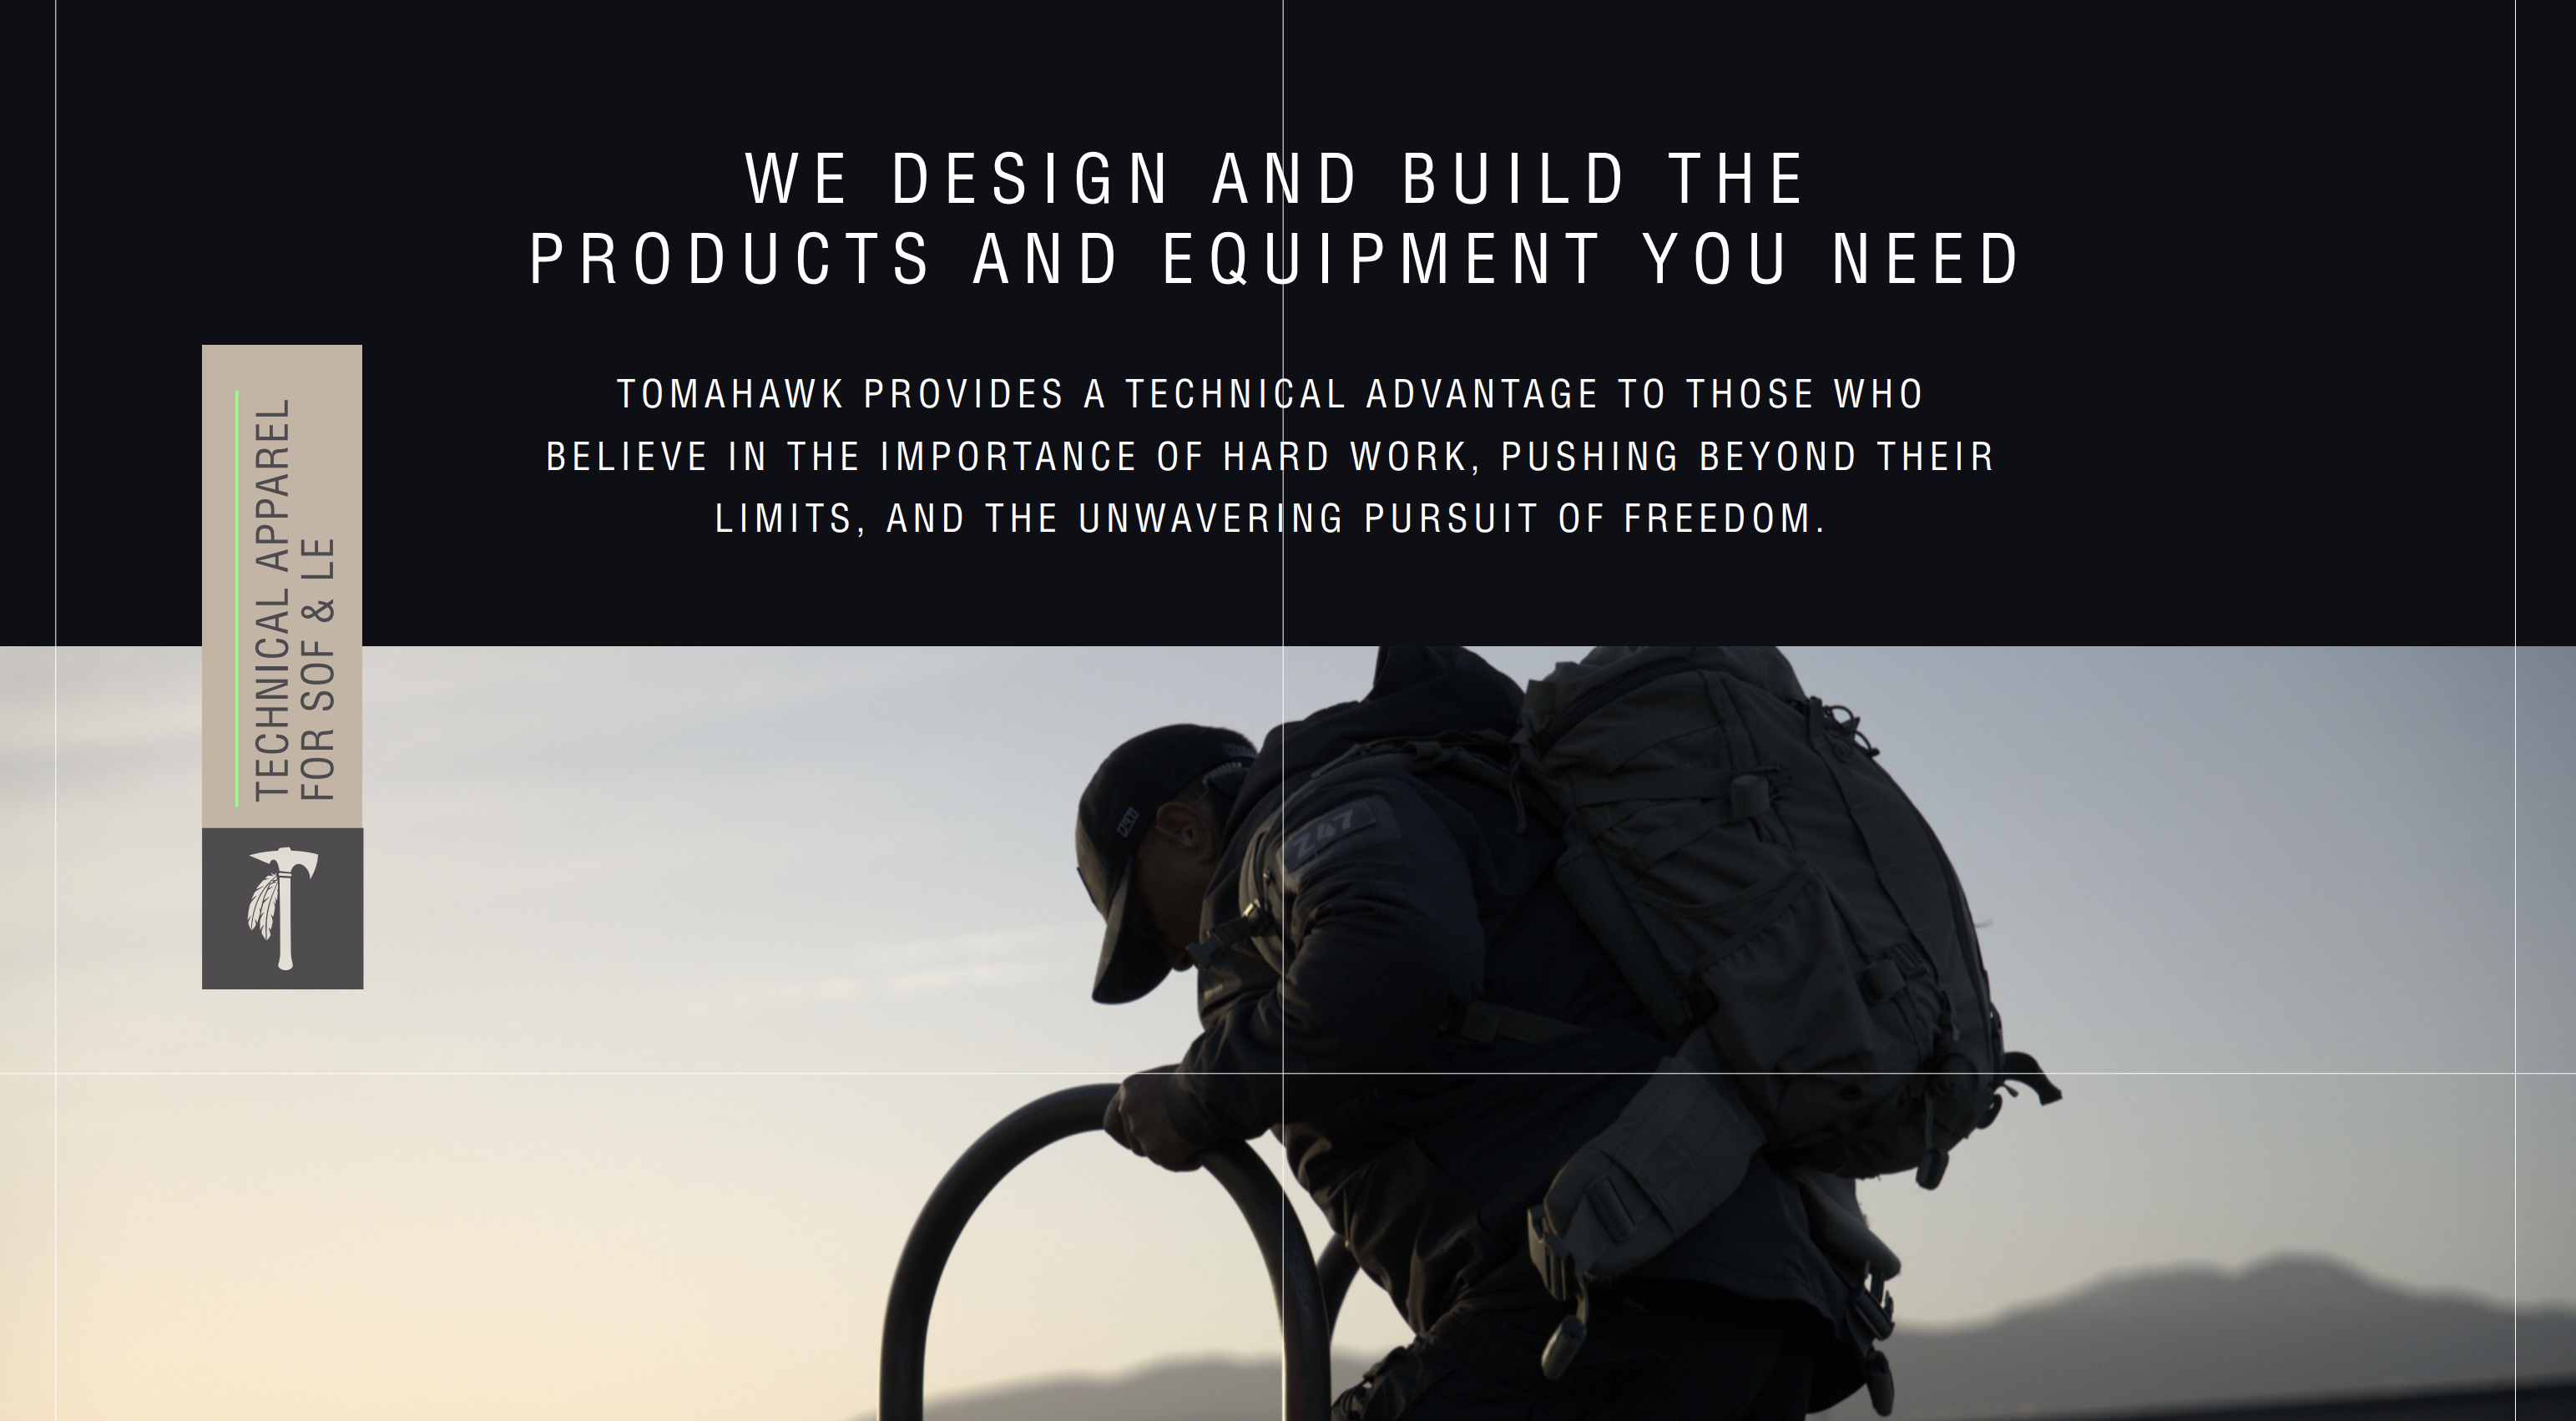 We Design and Build the Products and Equipment You Need